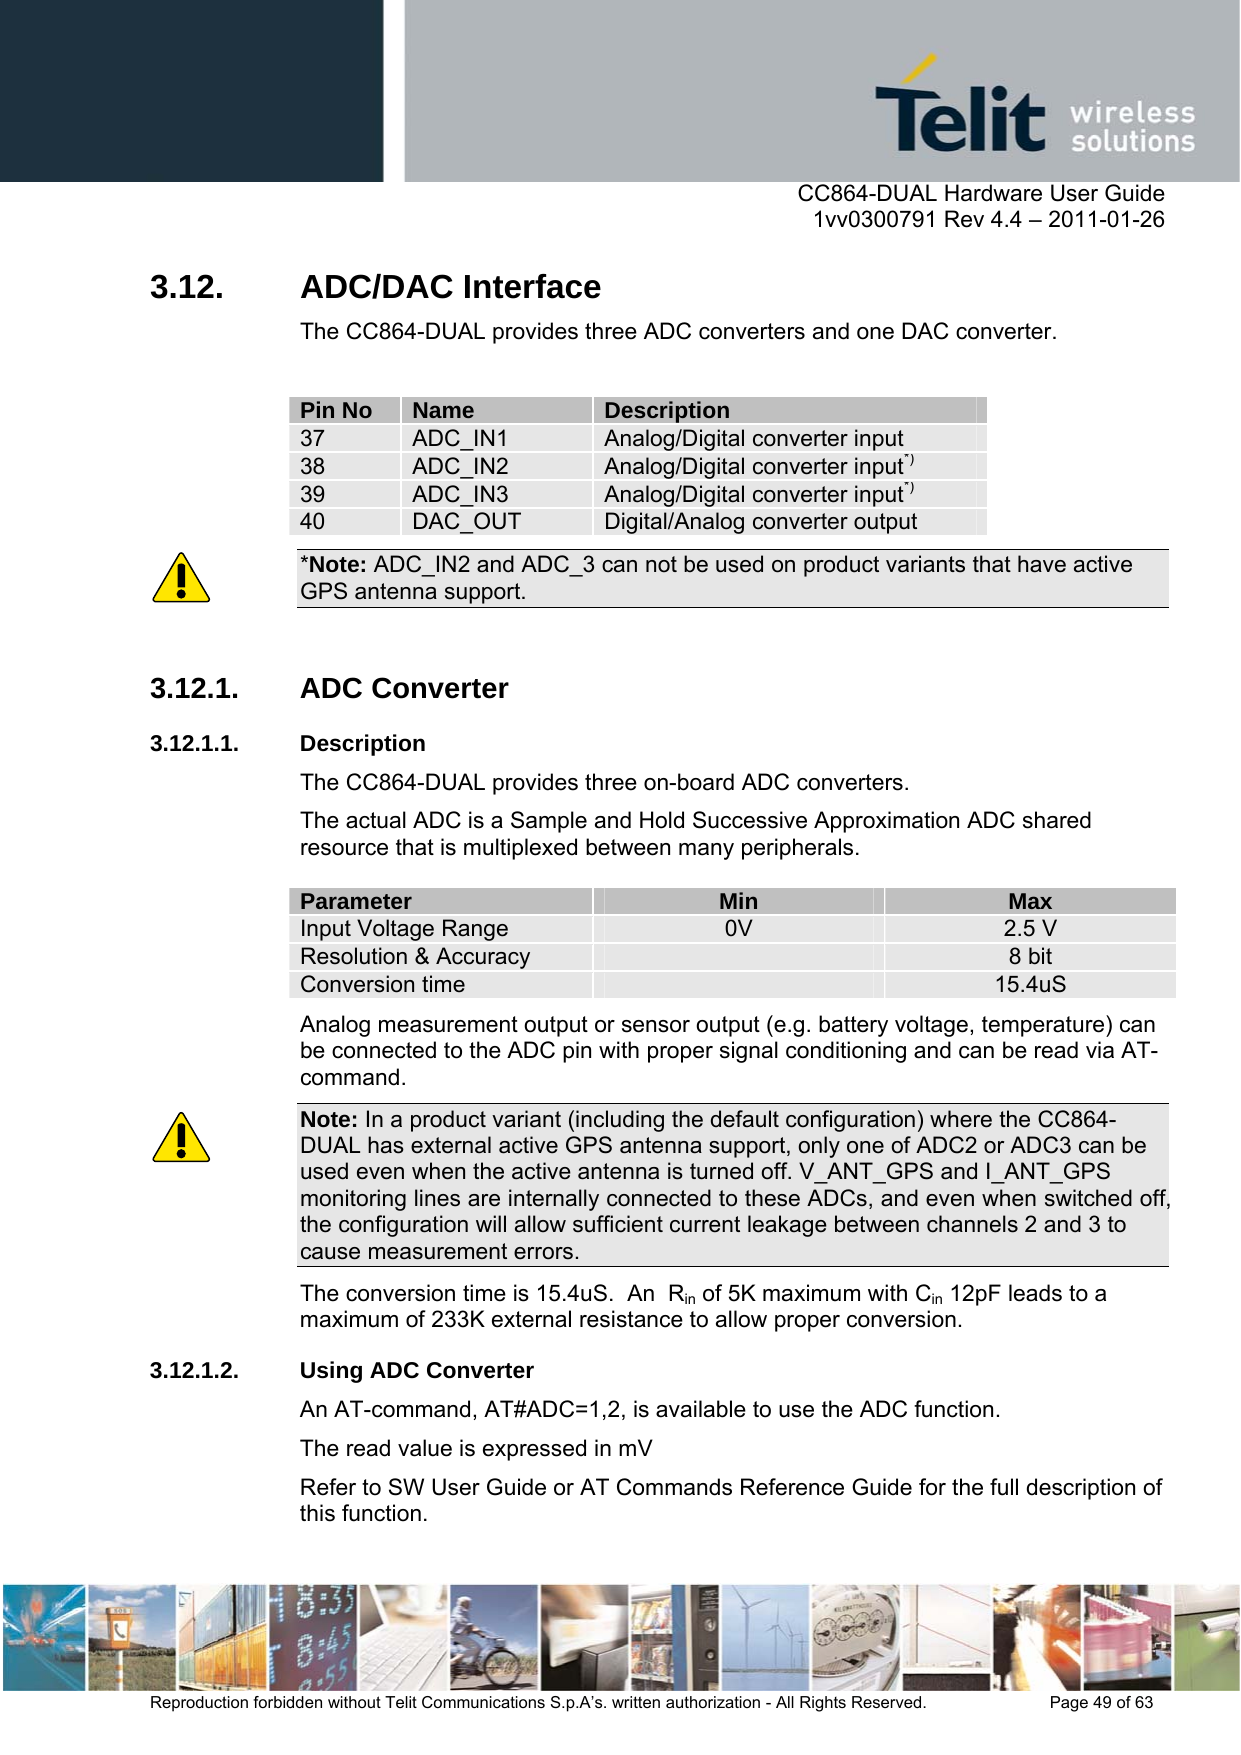      CC864-DUAL Hardware User Guide    1vv0300791 Rev 4.4 – 2011-01-26  Reproduction forbidden without Telit Communications S.p.A’s. written authorization - All Rights Reserved.    Page 49 of 63  3.12. ADC/DAC Interface The CC864-DUAL provides three ADC converters and one DAC converter.  Pin No  Name  Description 37  ADC_IN1  Analog/Digital converter input 38  ADC_IN2  Analog/Digital converter input*) 39  ADC_IN3  Analog/Digital converter input*) 40  DAC_OUT  Digital/Analog converter output *Note: ADC_IN2 and ADC_3 can not be used on product variants that have active GPS antenna support.  3.12.1. ADC Converter 3.12.1.1. Description The CC864-DUAL provides three on-board ADC converters.  The actual ADC is a Sample and Hold Successive Approximation ADC shared resource that is multiplexed between many peripherals.  Parameter  Min  Max Input Voltage Range  0V  2.5 V Resolution &amp; Accuracy   8 bit Conversion time   15.4uS Analog measurement output or sensor output (e.g. battery voltage, temperature) can be connected to the ADC pin with proper signal conditioning and can be read via AT-command. Note: In a product variant (including the default configuration) where the CC864-DUAL has external active GPS antenna support, only one of ADC2 or ADC3 can be used even when the active antenna is turned off. V_ANT_GPS and I_ANT_GPS monitoring lines are internally connected to these ADCs, and even when switched off, the configuration will allow sufficient current leakage between channels 2 and 3 to cause measurement errors. The conversion time is 15.4uS.  An  Rin of 5K maximum with Cin 12pF leads to a maximum of 233K external resistance to allow proper conversion. 3.12.1.2. Using ADC Converter An AT-command, AT#ADC=1,2, is available to use the ADC function. The read value is expressed in mV Refer to SW User Guide or AT Commands Reference Guide for the full description of this function. 